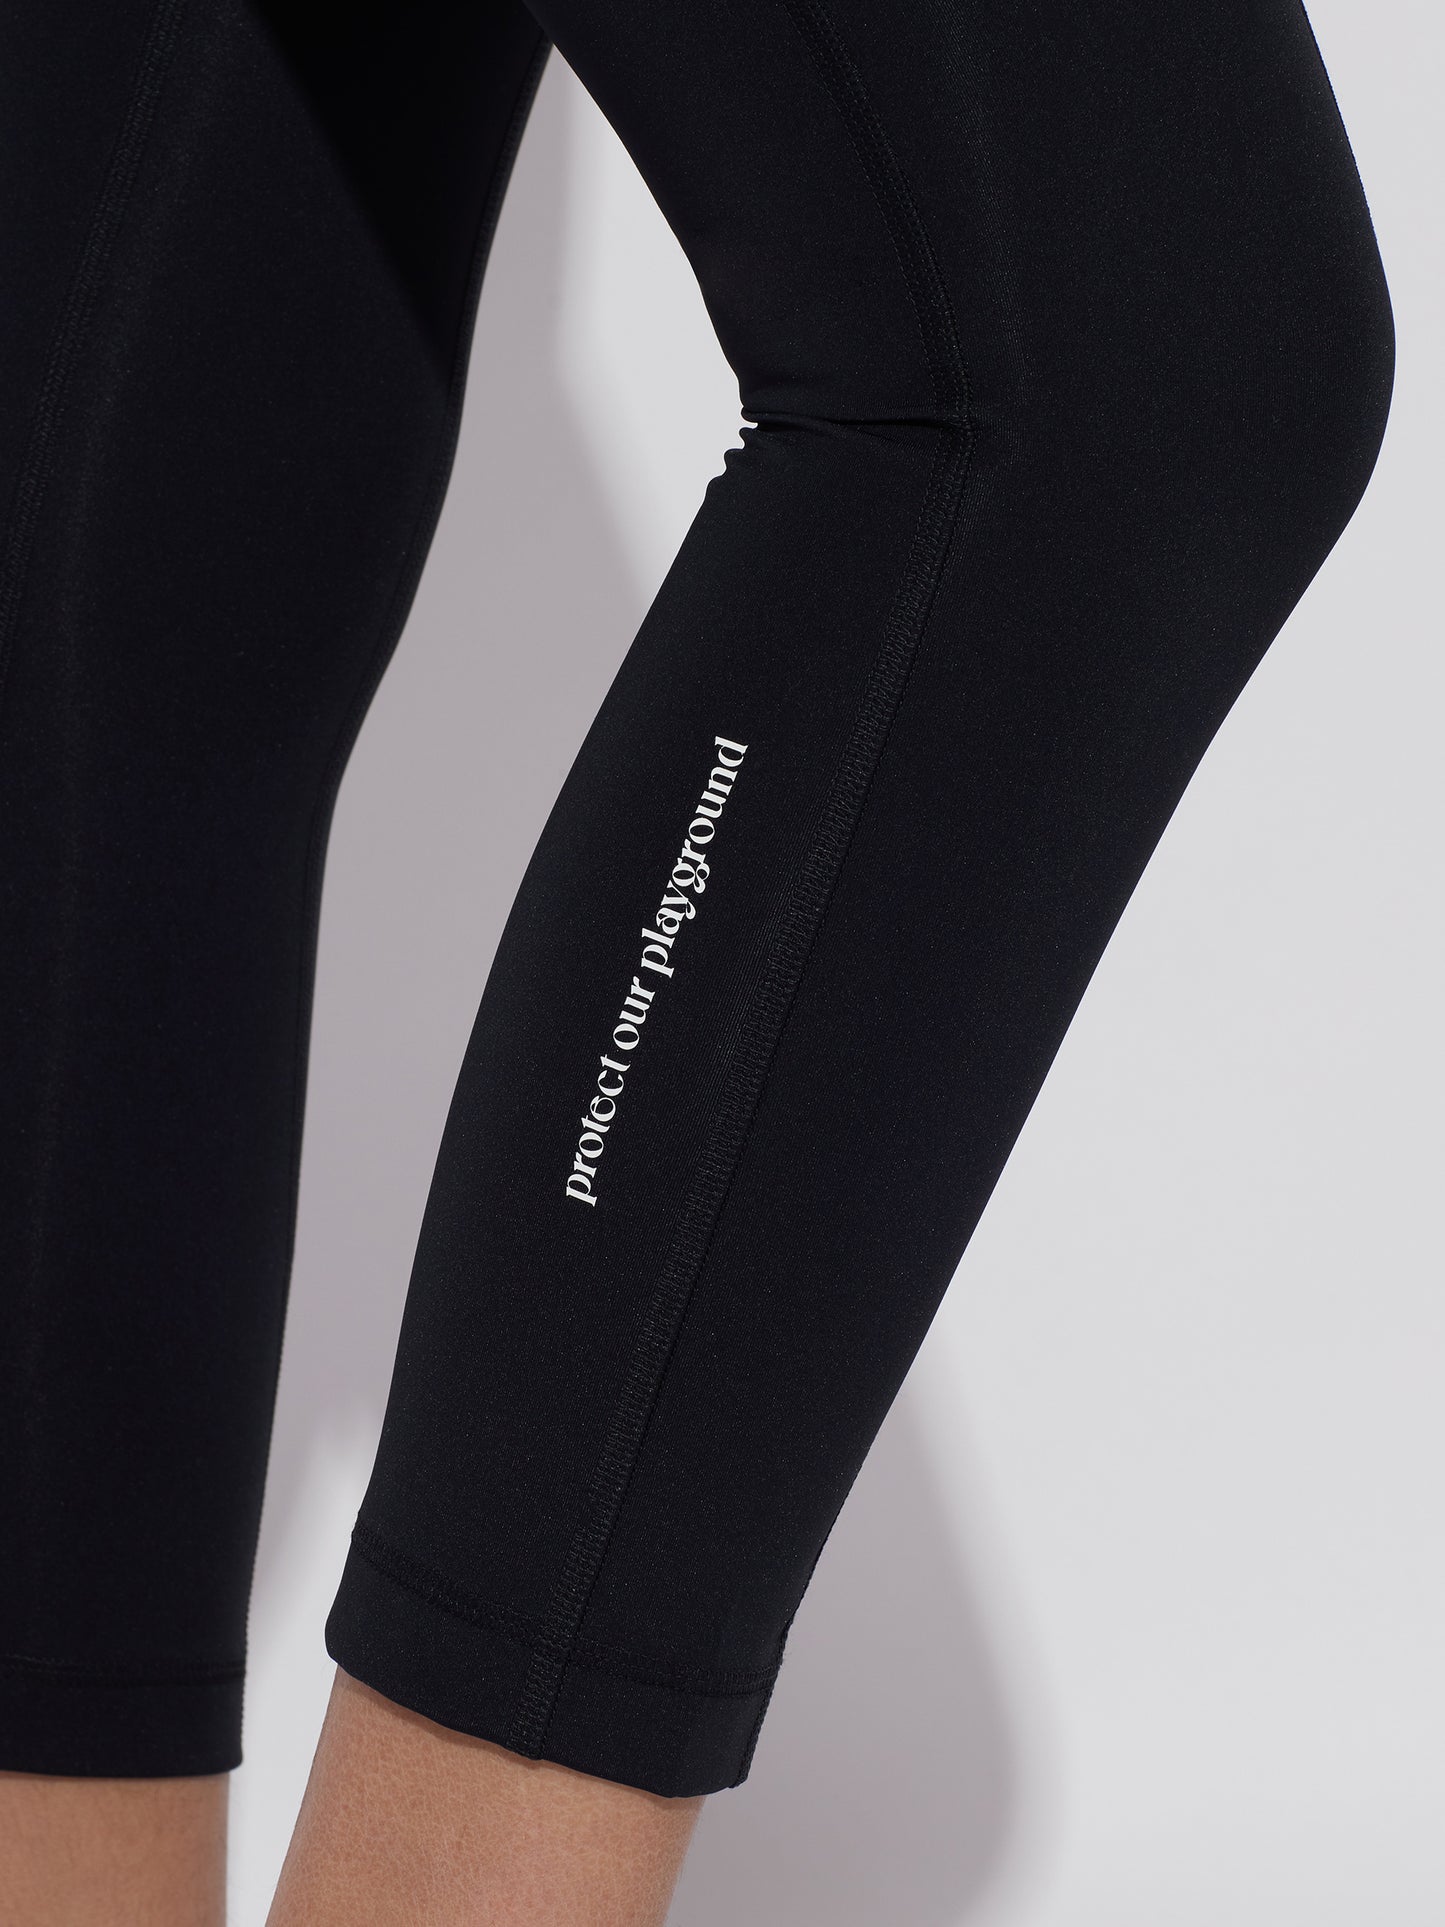 Get in Shape Legging  Running & Yoga Legging - Recycled and recyclable -  Circle Sportswear